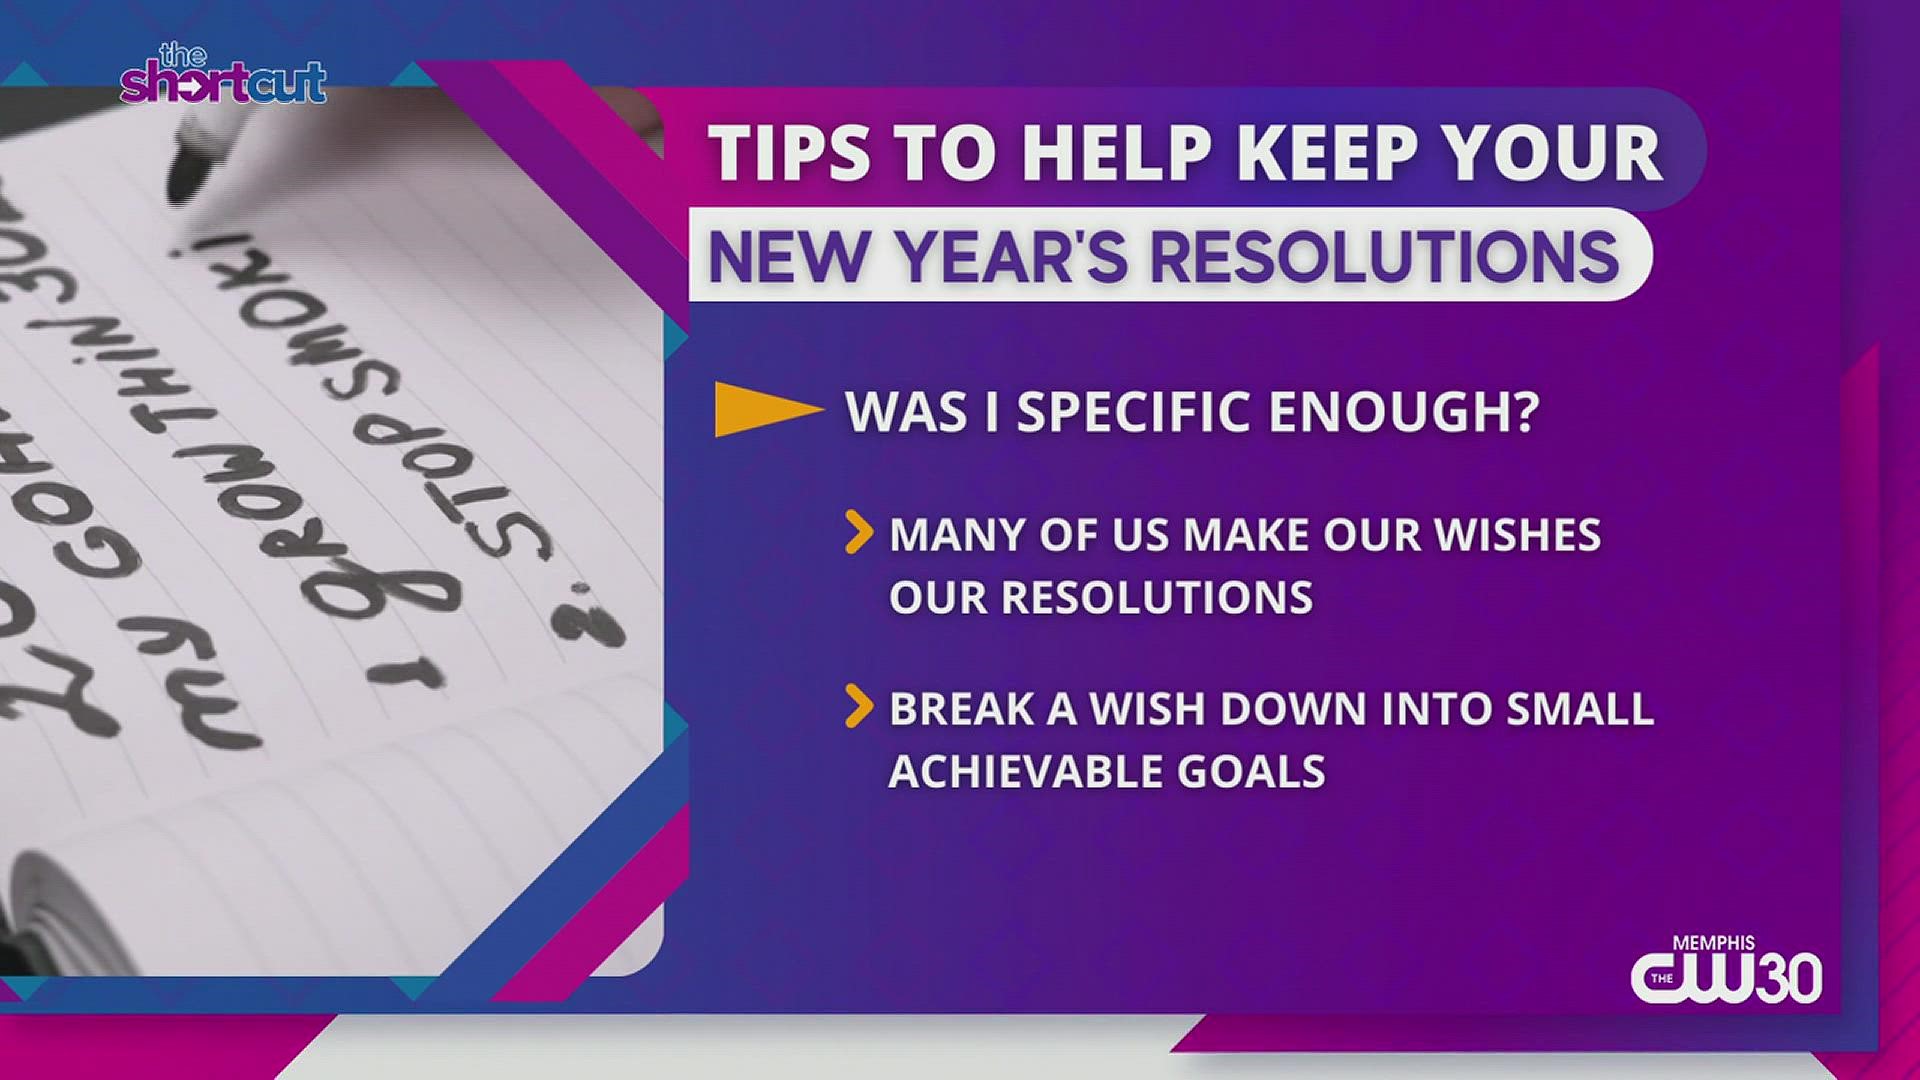 Make 2022 your year and keep your New Year's resolution at last! Check out these tips from lifestyle host Sydney Neely and life coach Danese Banks on "The Shortcut!"